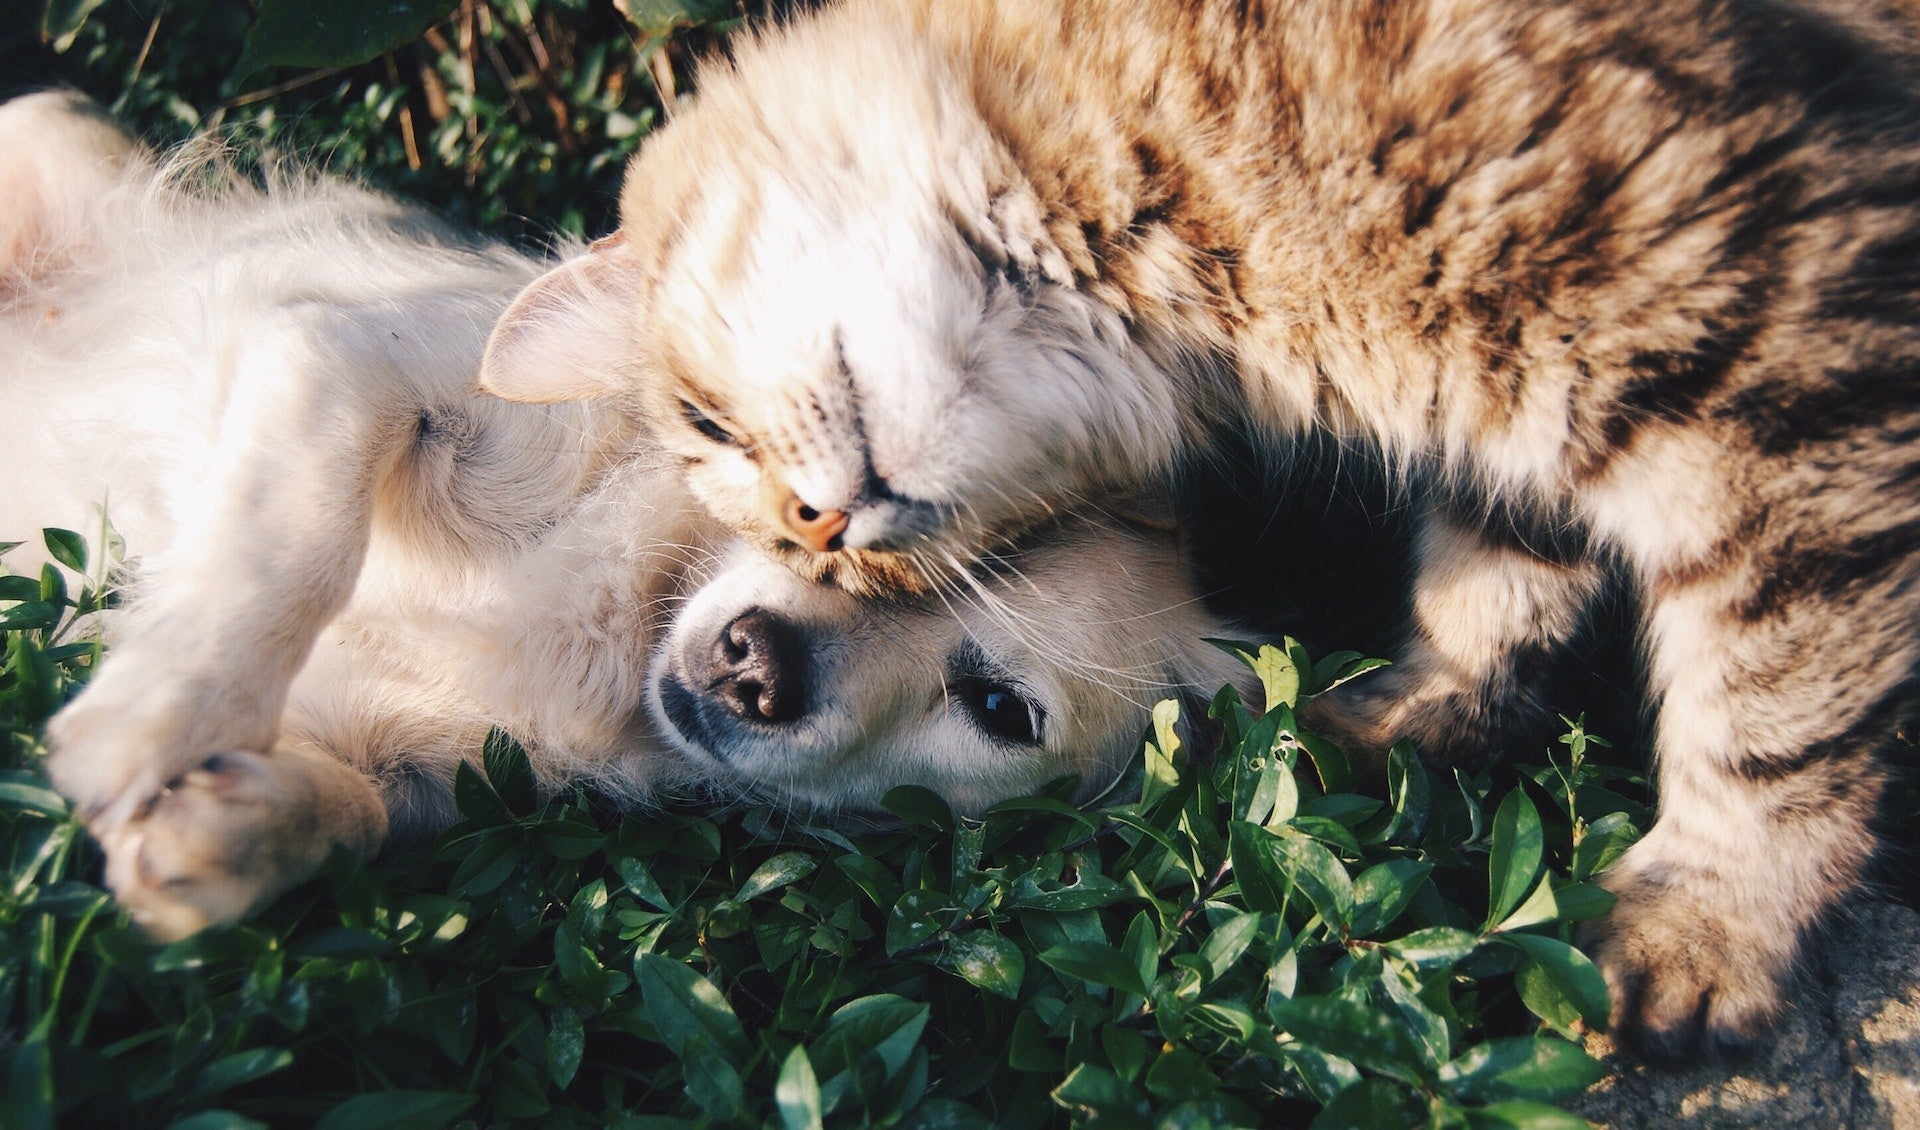 Cats vs Dogs, which has the Better Sense of Smell?